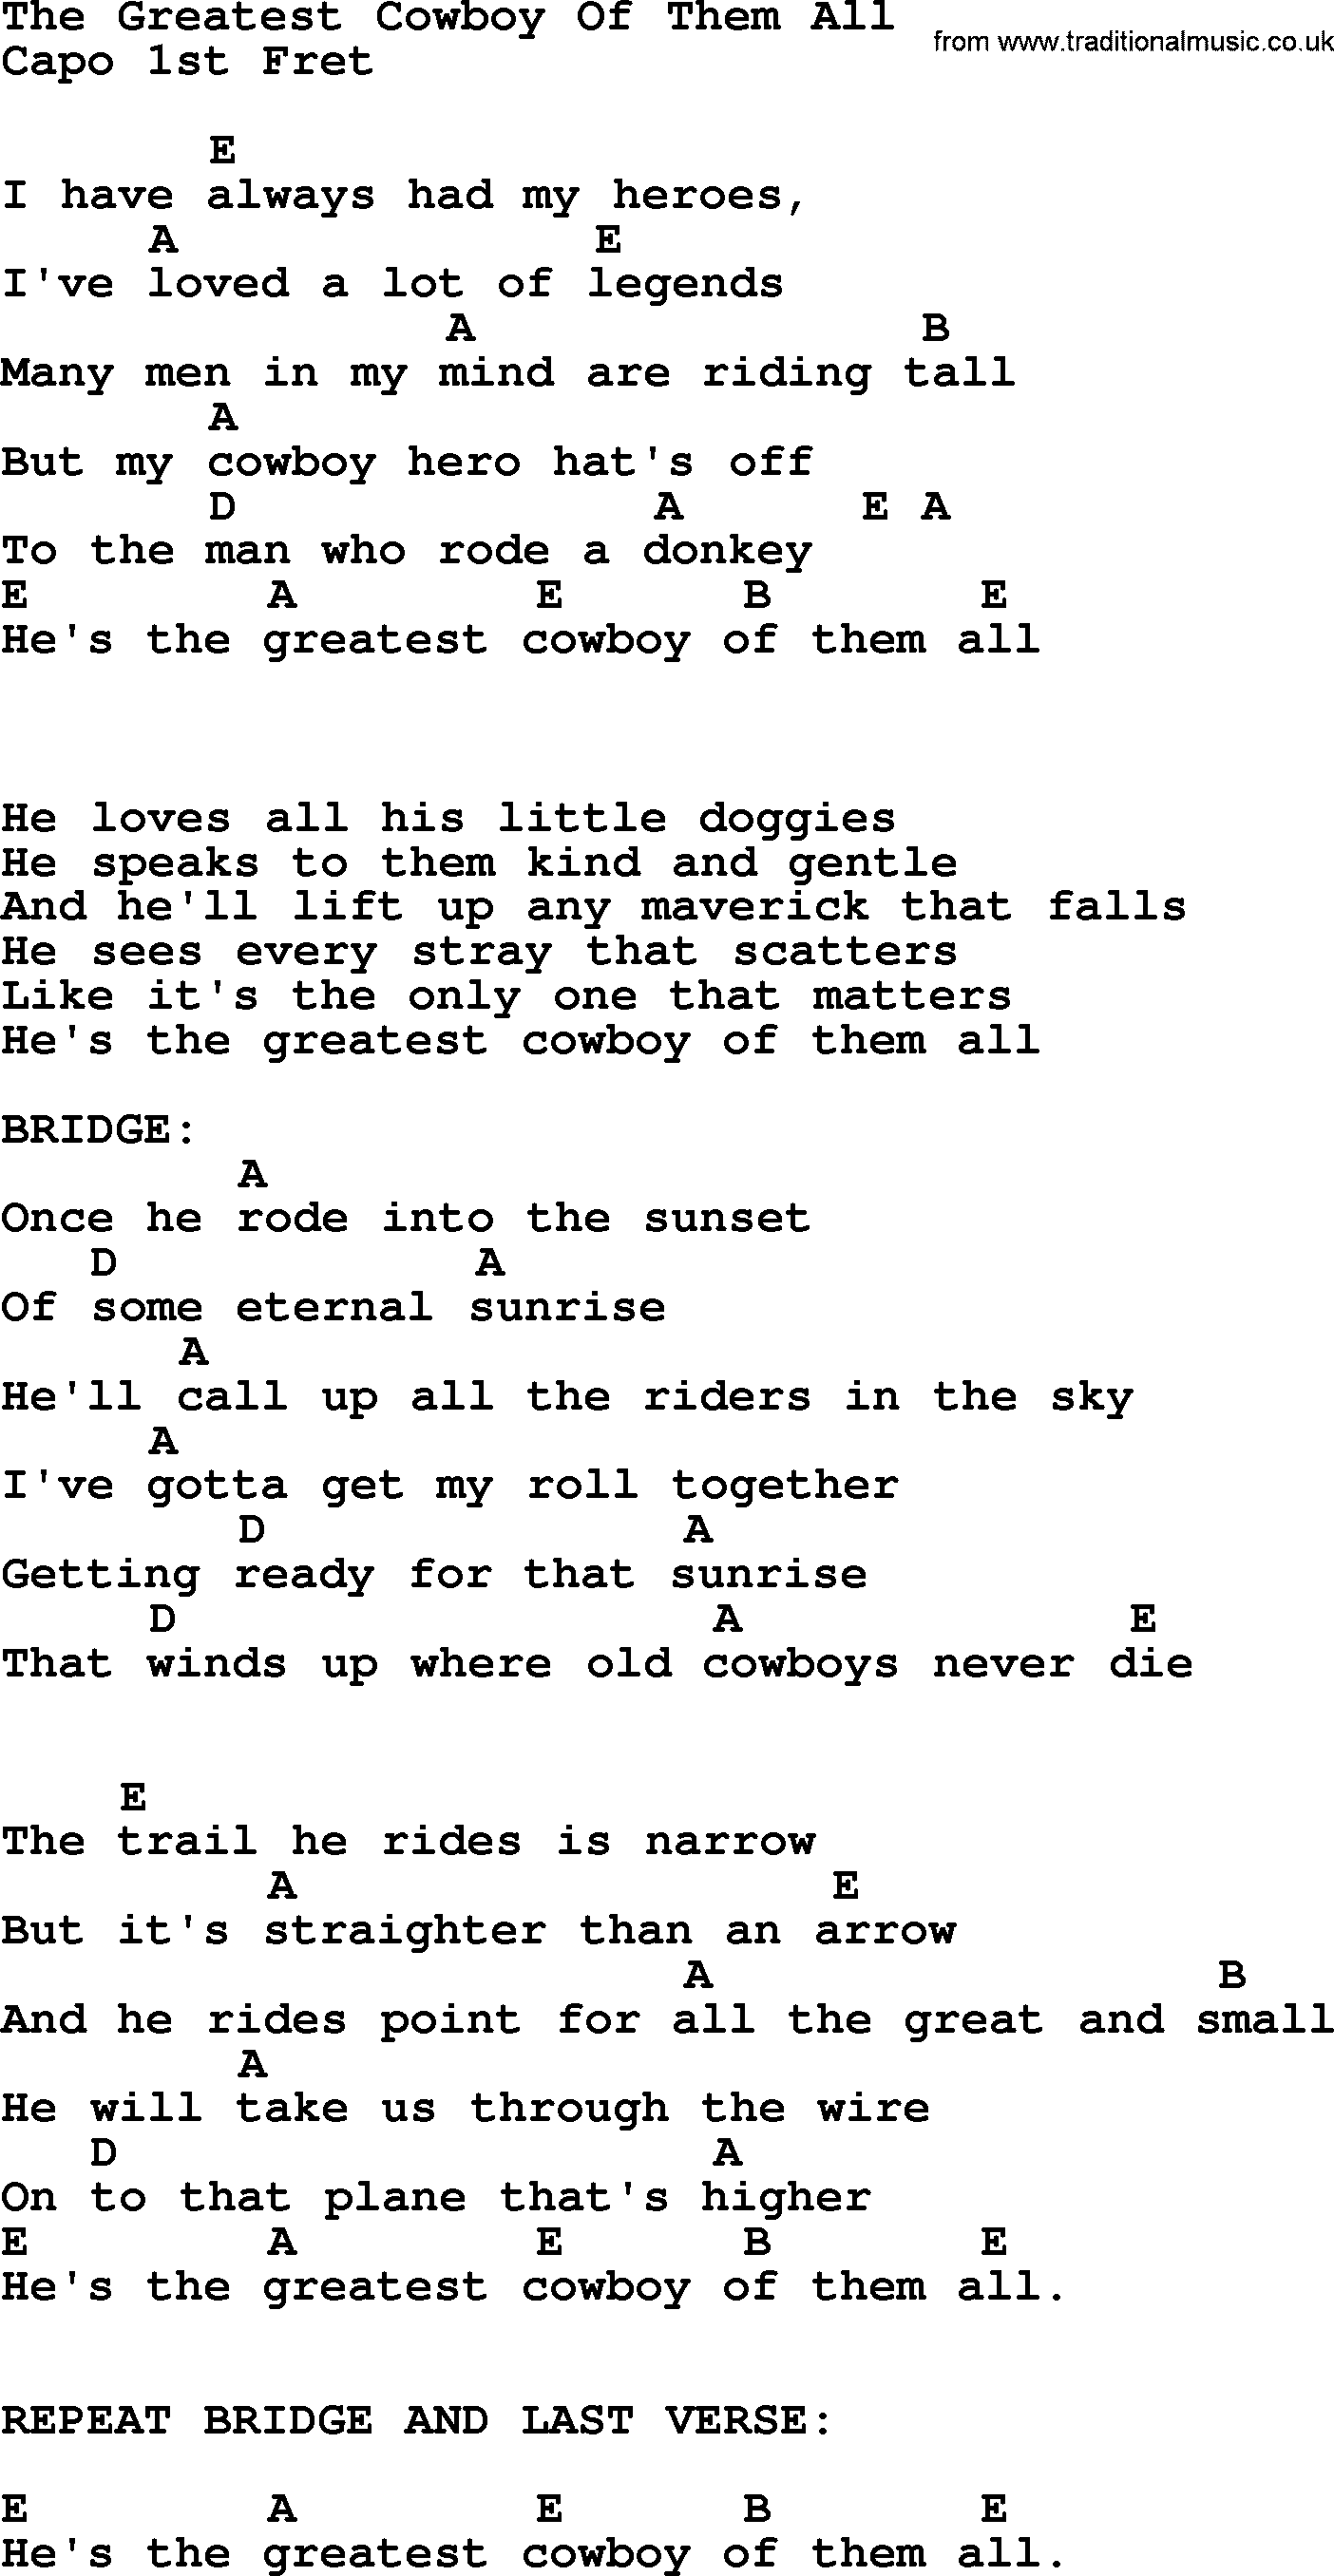 Johnny Cash song The Greatest Cowboy Of Them All, lyrics and chords